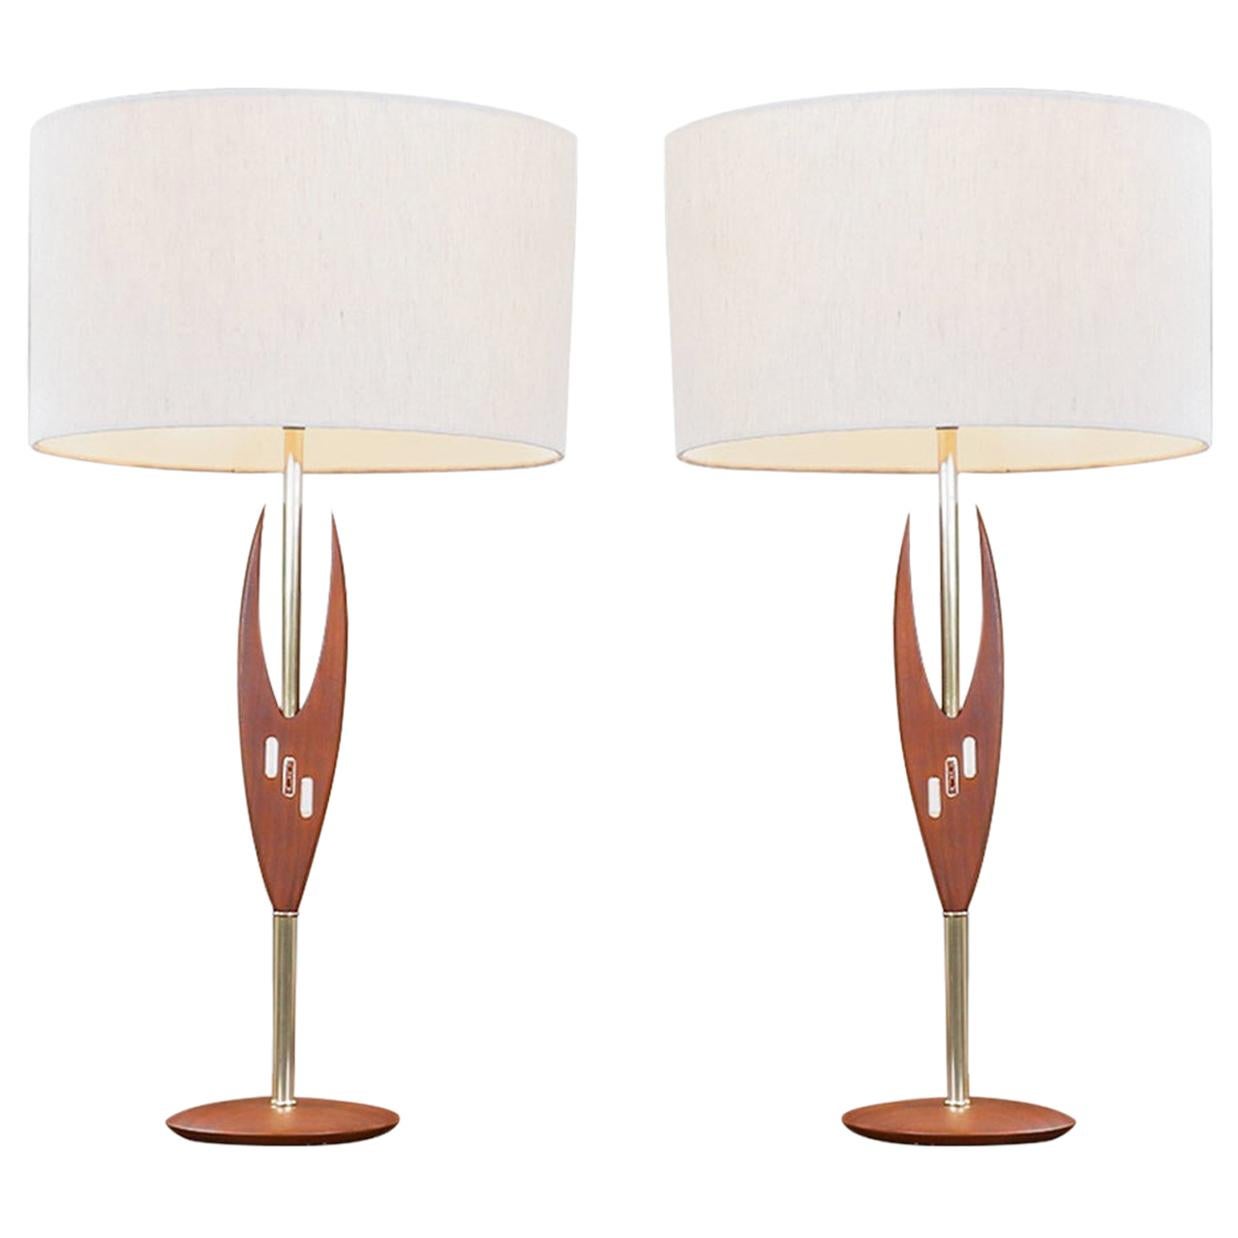 Midcentury Sculpted Walnut and Inlaid Tile Table Lamps